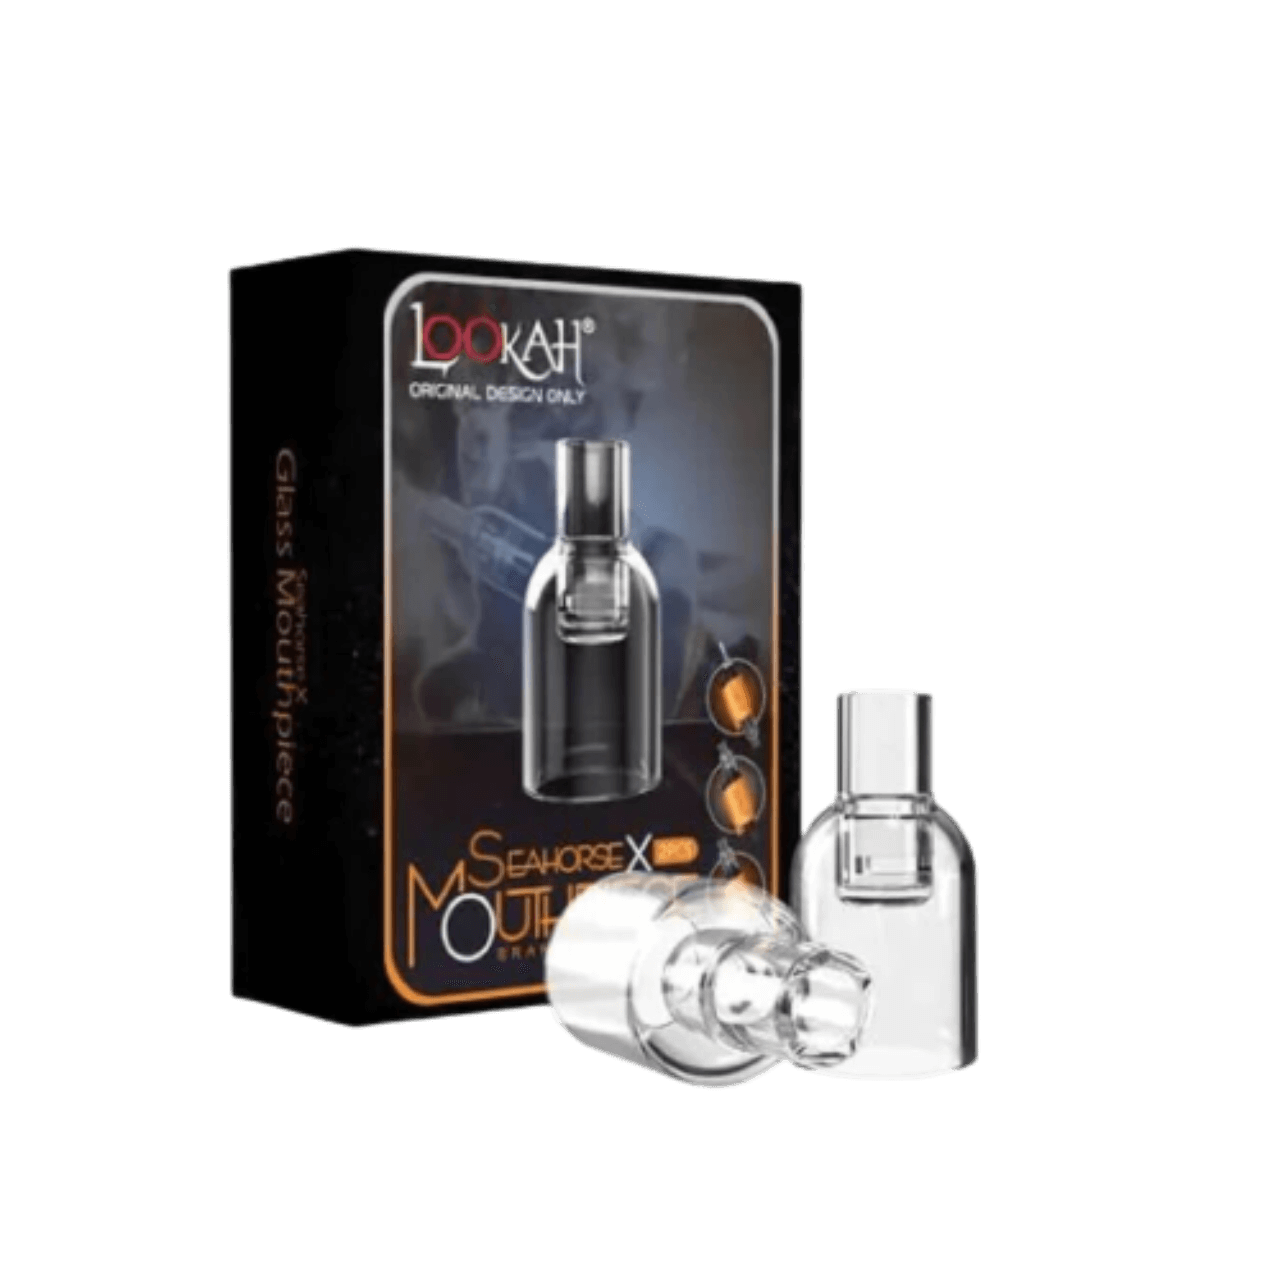 Lookah Seahorse X Mouthpiece (Pack of 2)